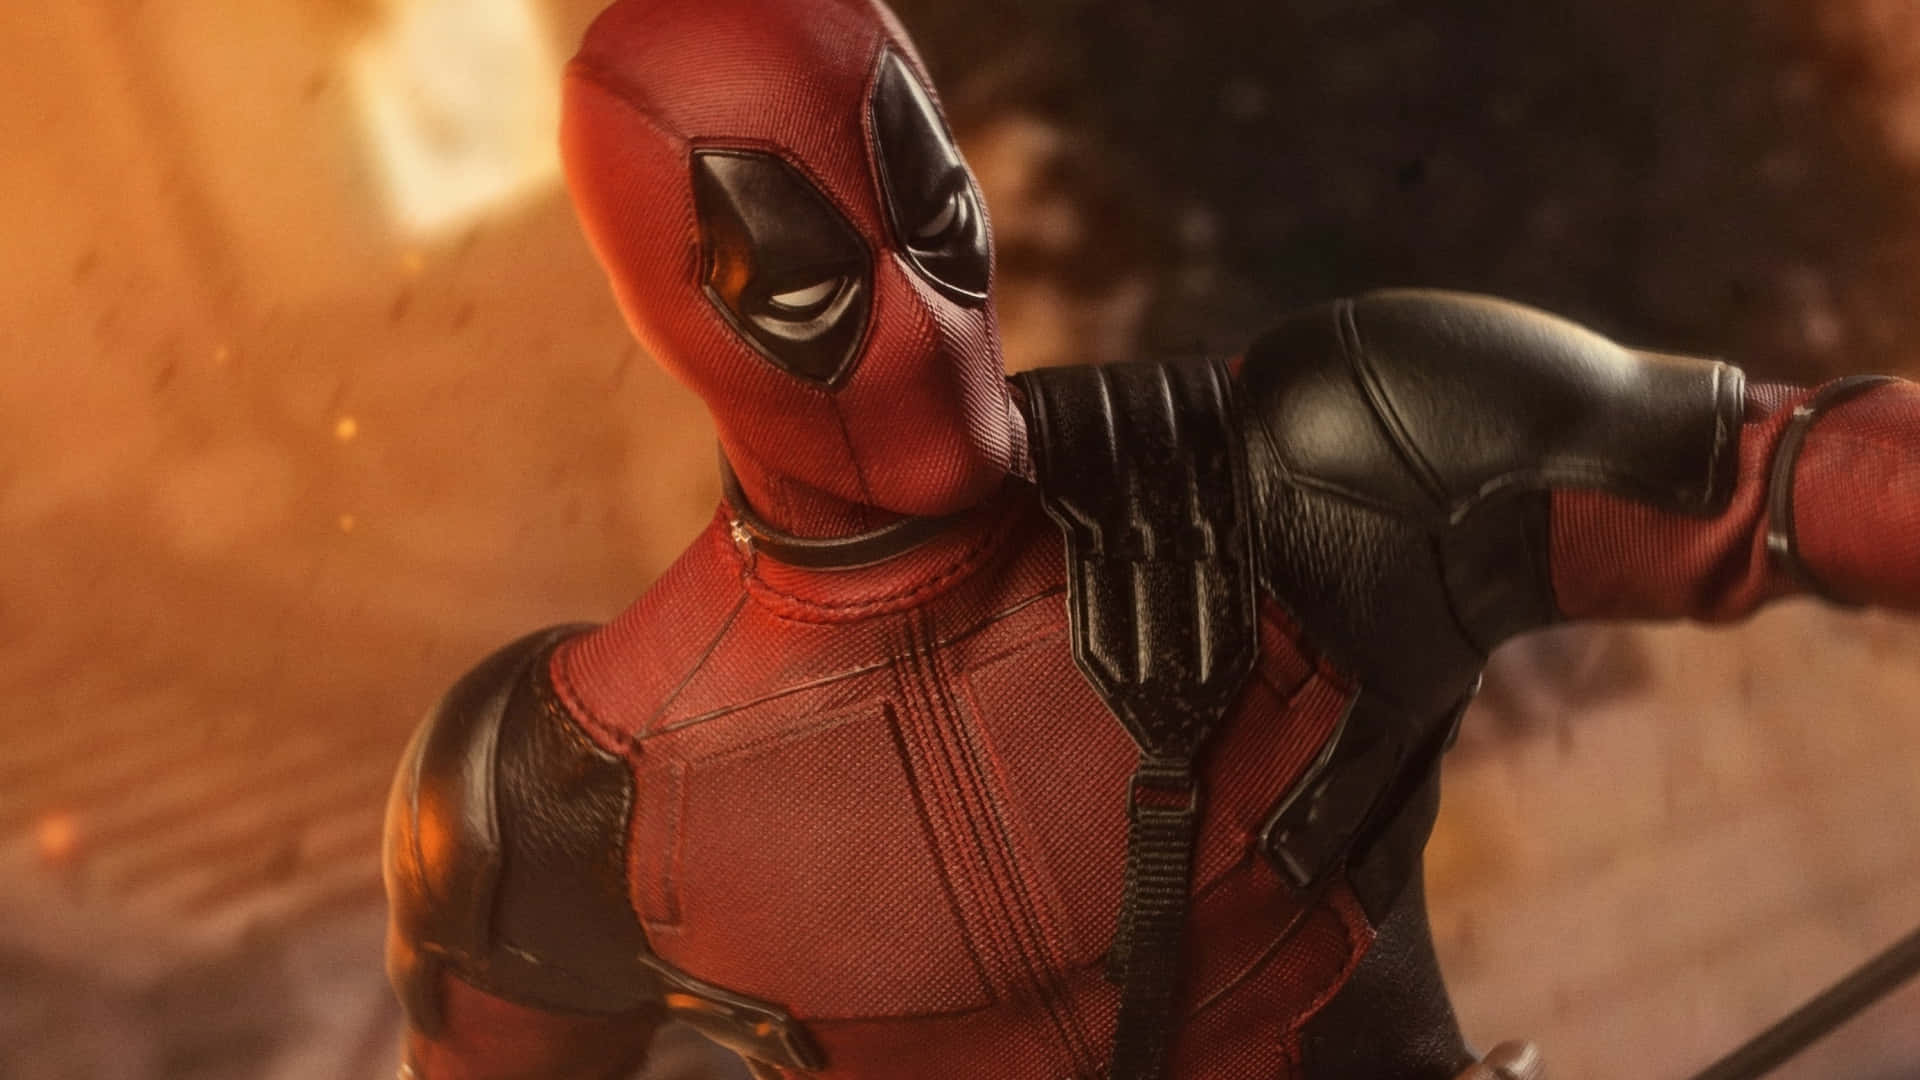 “Deadpool is Ready for Action” Wallpaper